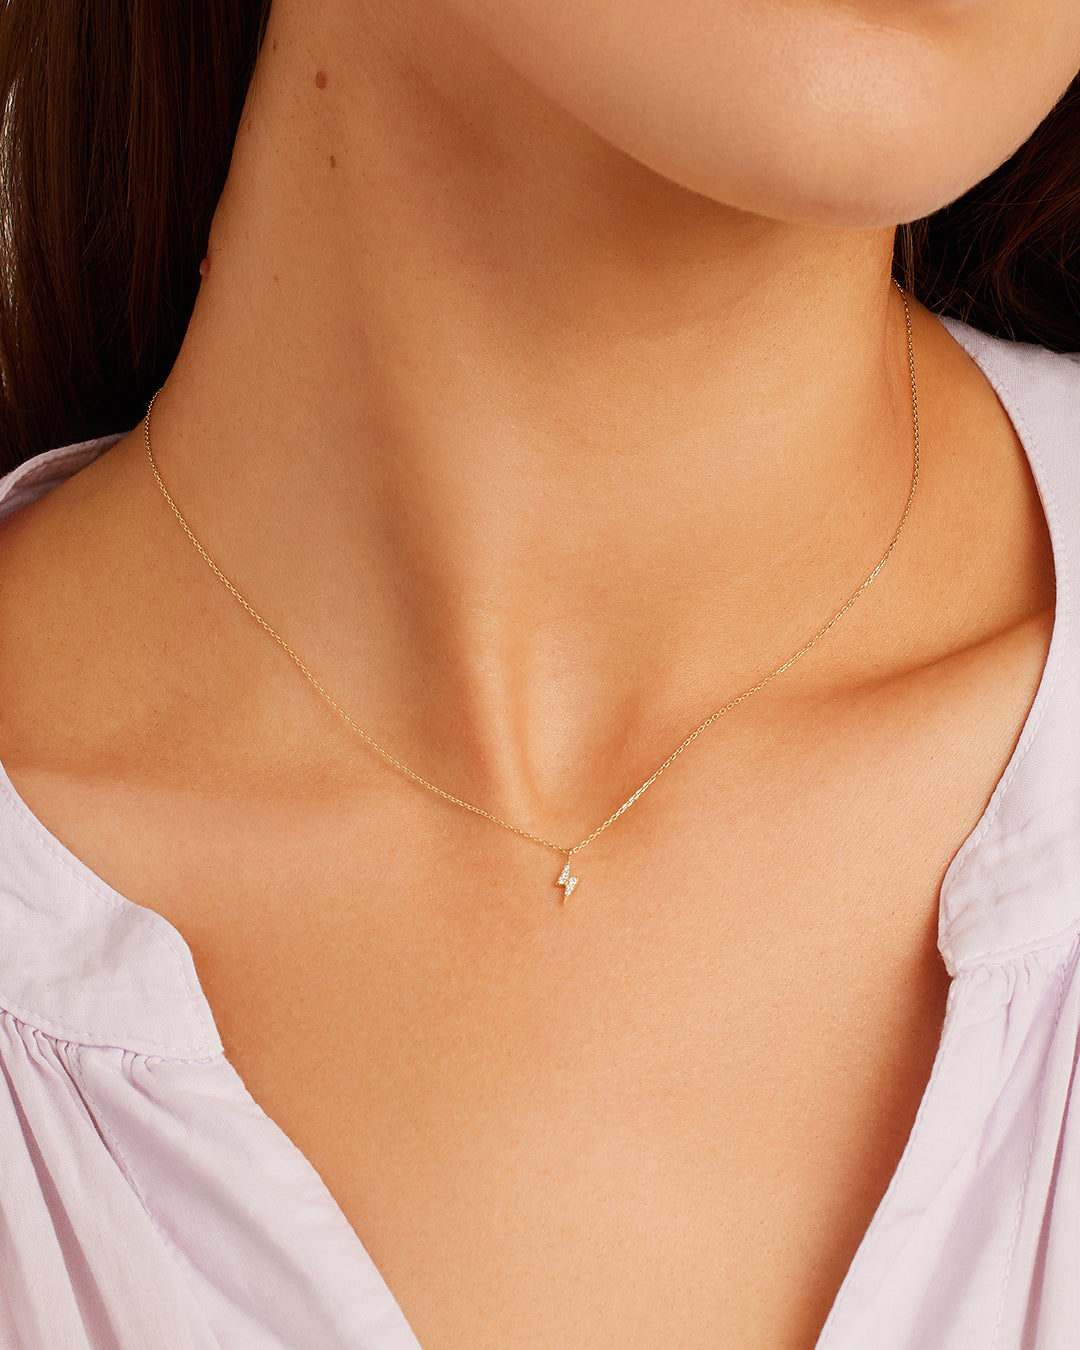 Classic Diamond Necklace in 14K Solid Gold, Women's by Gorjana